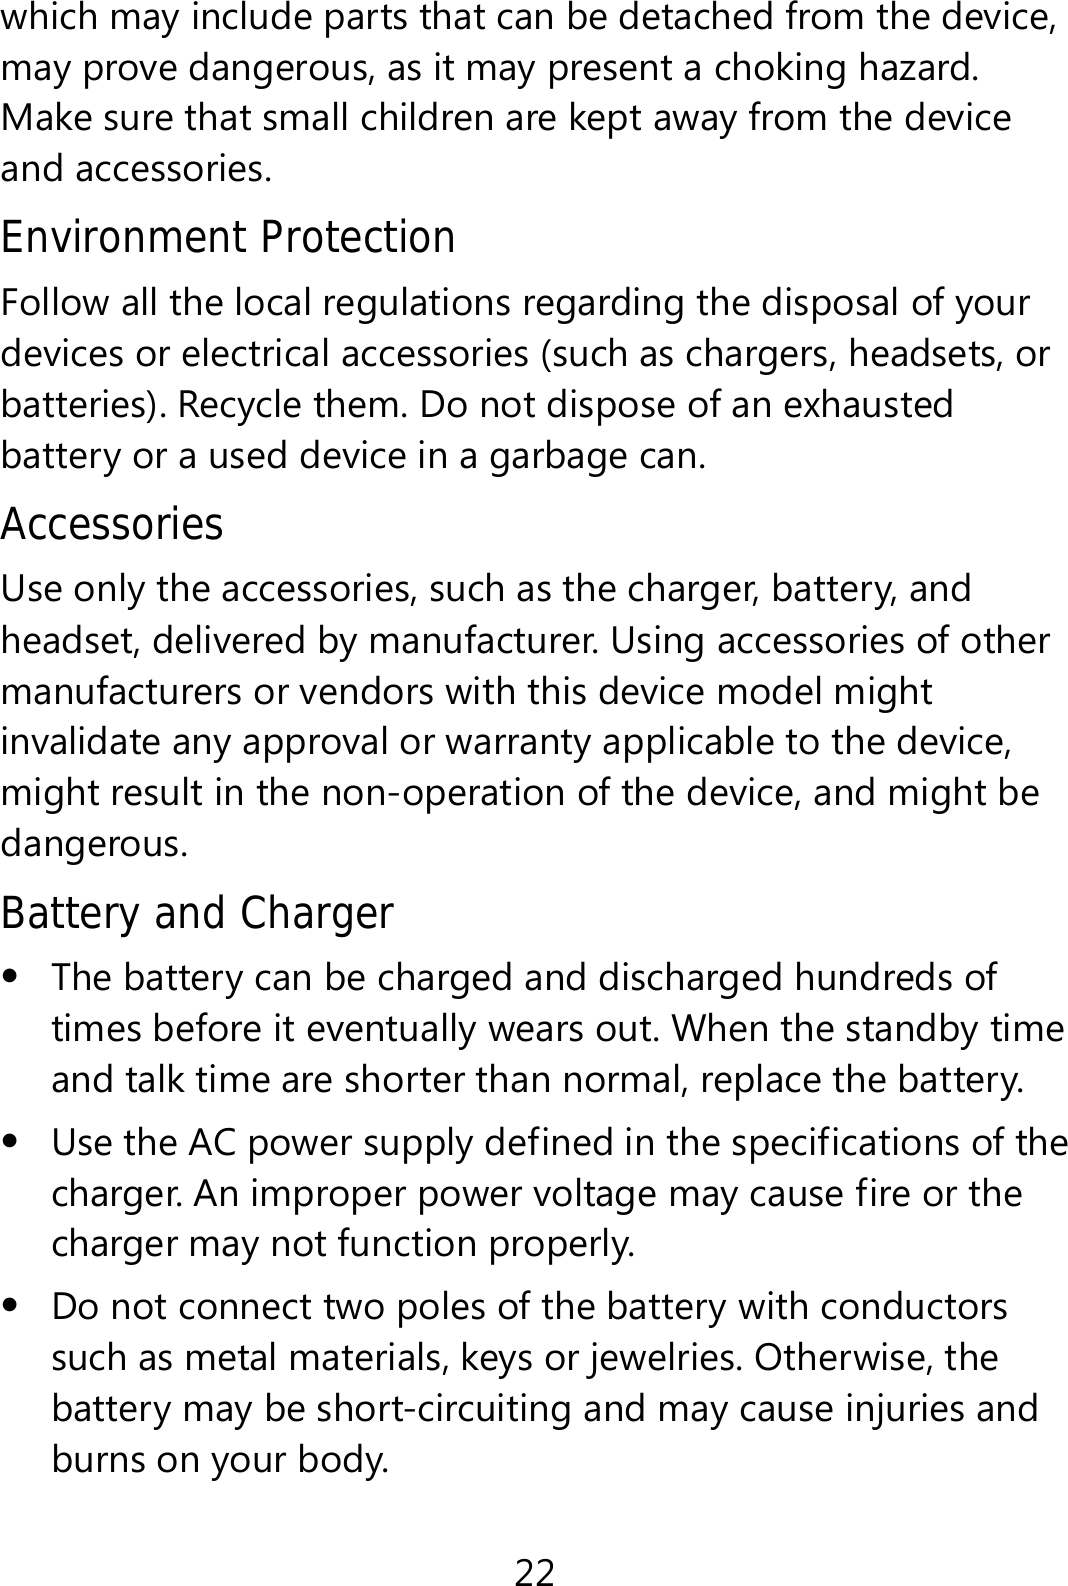 22 which may include parts that can be detached from the device, may prove dangerous, as it may present a choking hazard. Make sure that small children are kept away from the device and accessories. Environment Protection Follow all the local regulations regarding the disposal of your devices or electrical accessories (such as chargers, headsets, or batteries). Recycle them. Do not dispose of an exhausted battery or a used device in a garbage can. Accessories Use only the accessories, such as the charger, battery, and headset, delivered by manufacturer. Using accessories of other manufacturers or vendors with this device model might invalidate any approval or warranty applicable to the device, might result in the non-operation of the device, and might be dangerous. Battery and Charger  The battery can be charged and discharged hundreds of times before it eventually wears out. When the standby time and talk time are shorter than normal, replace the battery.  Use the AC power supply defined in the specifications of the charger. An improper power voltage may cause fire or the charger may not function properly.  Do not connect two poles of the battery with conductors such as metal materials, keys or jewelries. Otherwise, the battery may be short-circuiting and may cause injuries and burns on your body. 